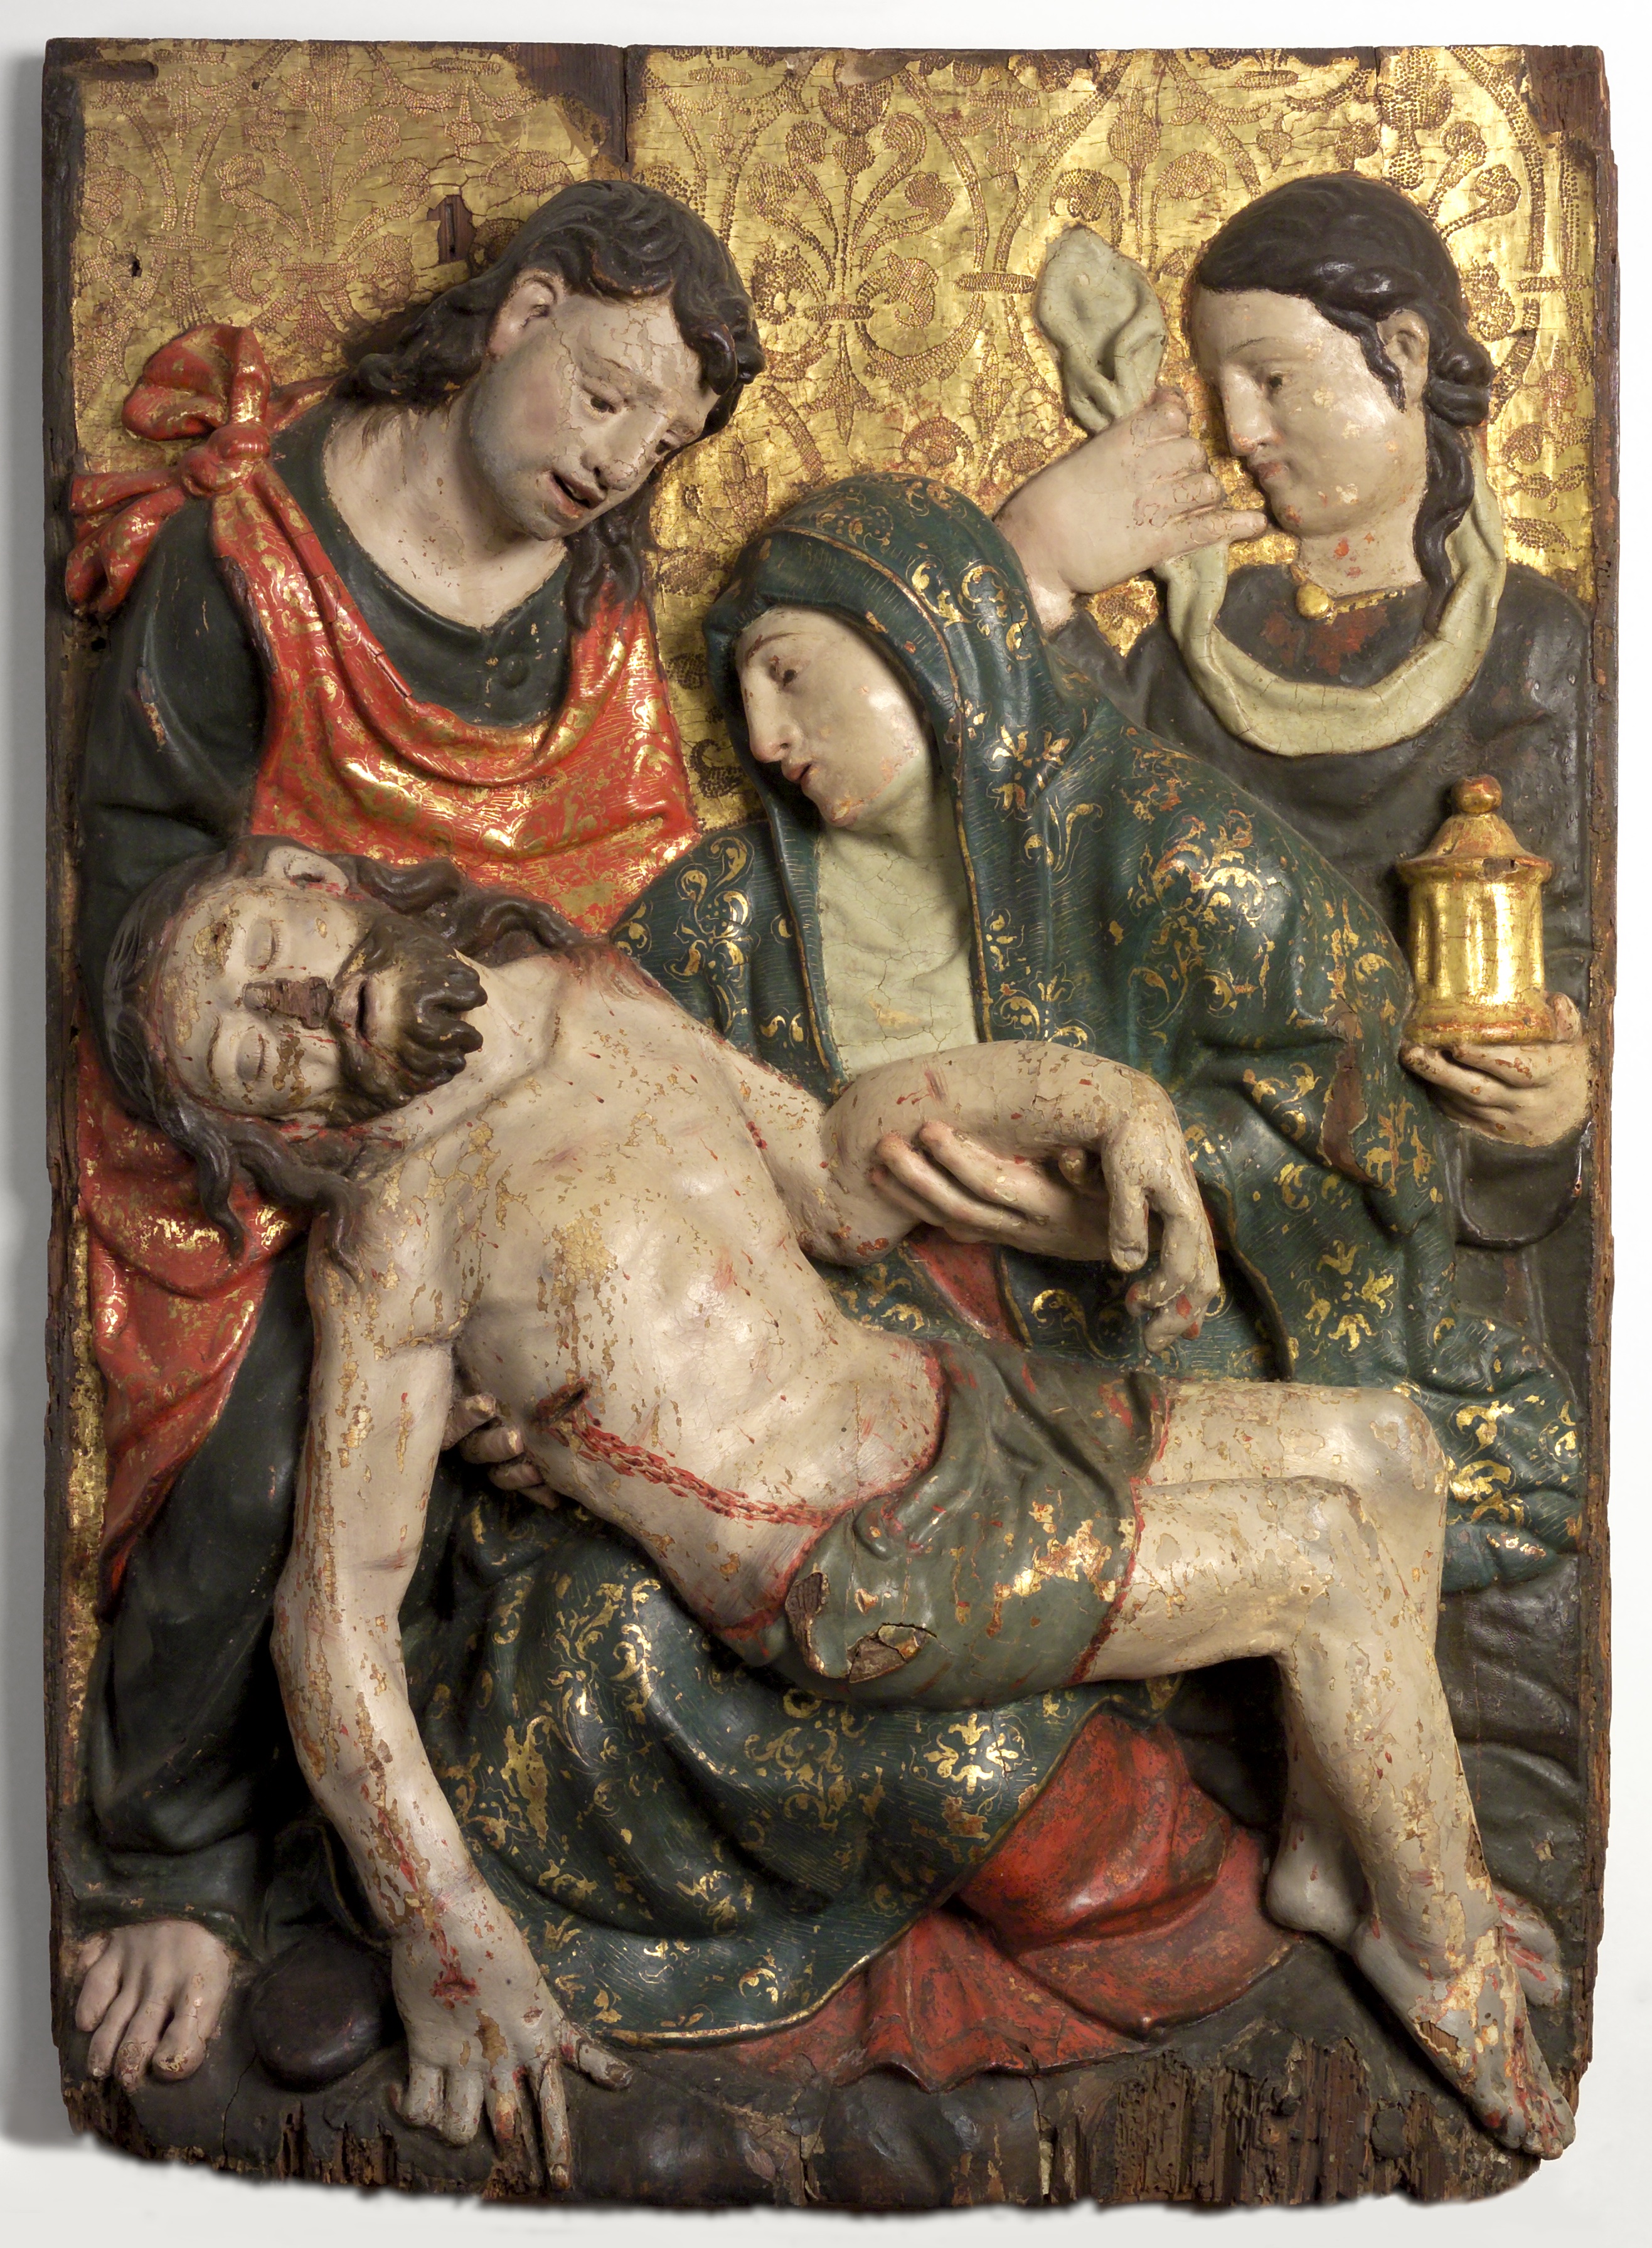 Carved and painted wood sculpture showing Mary holding her dying son's body.